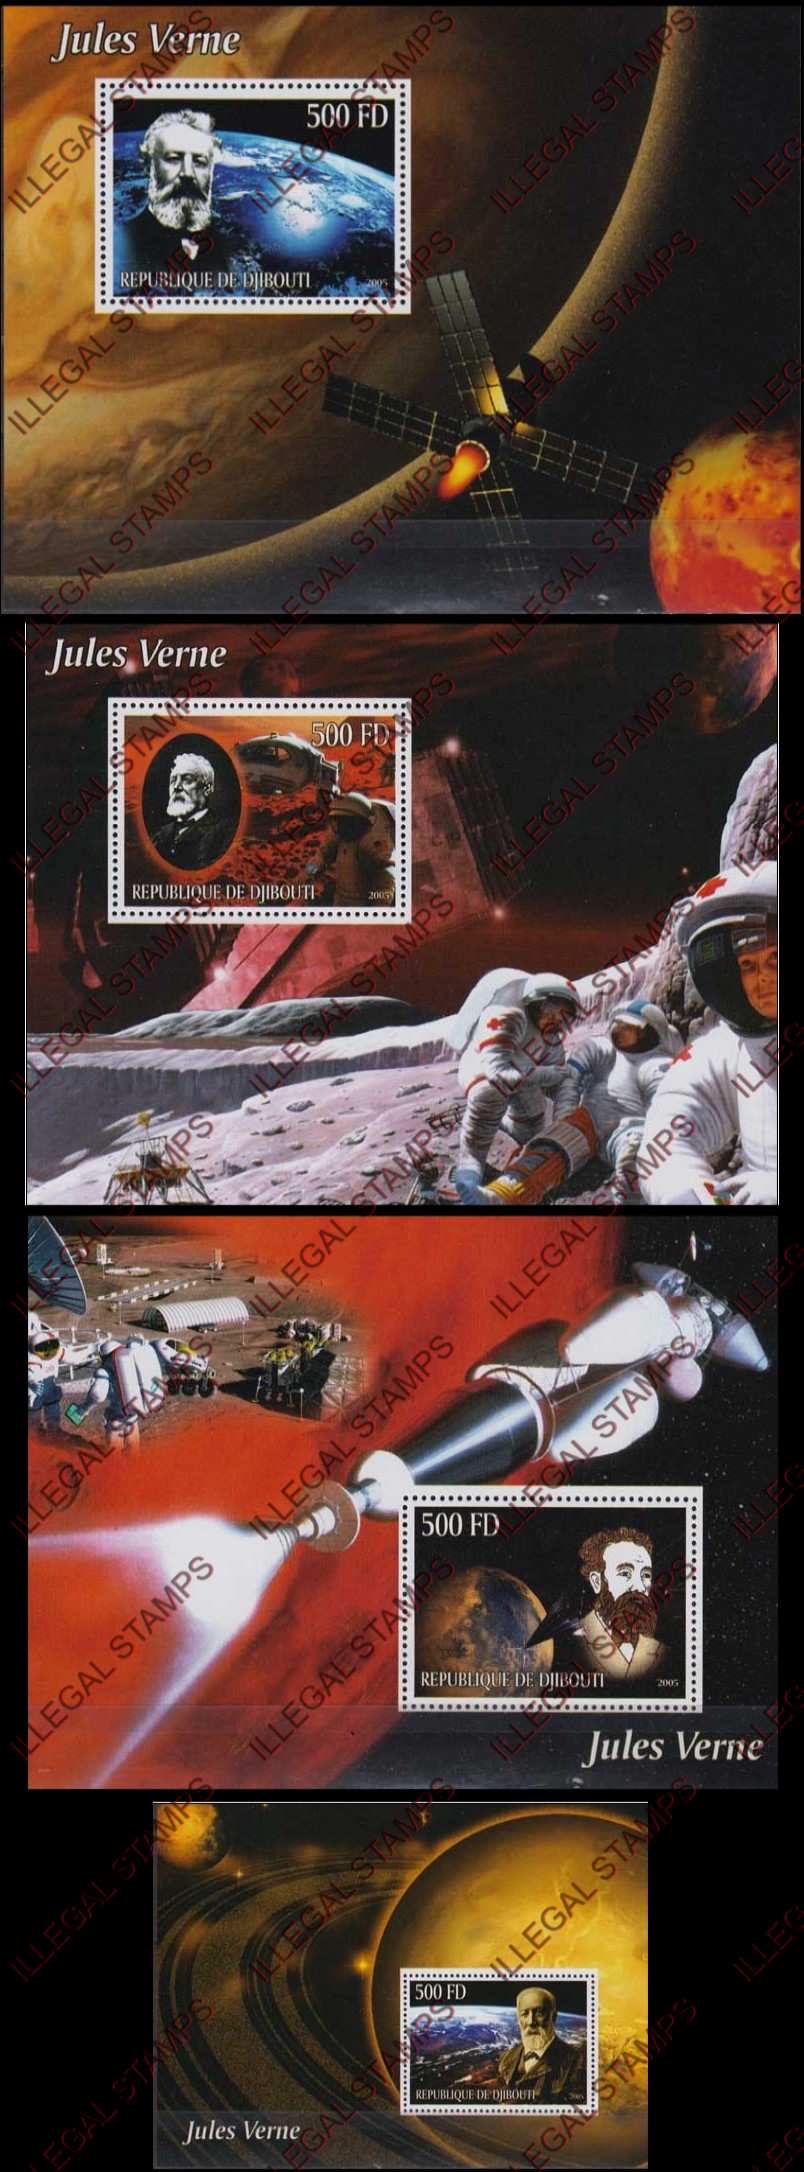 Djibouti 2005 Space Jules Verne Illegal Stamp Souvenir Sheets of 1